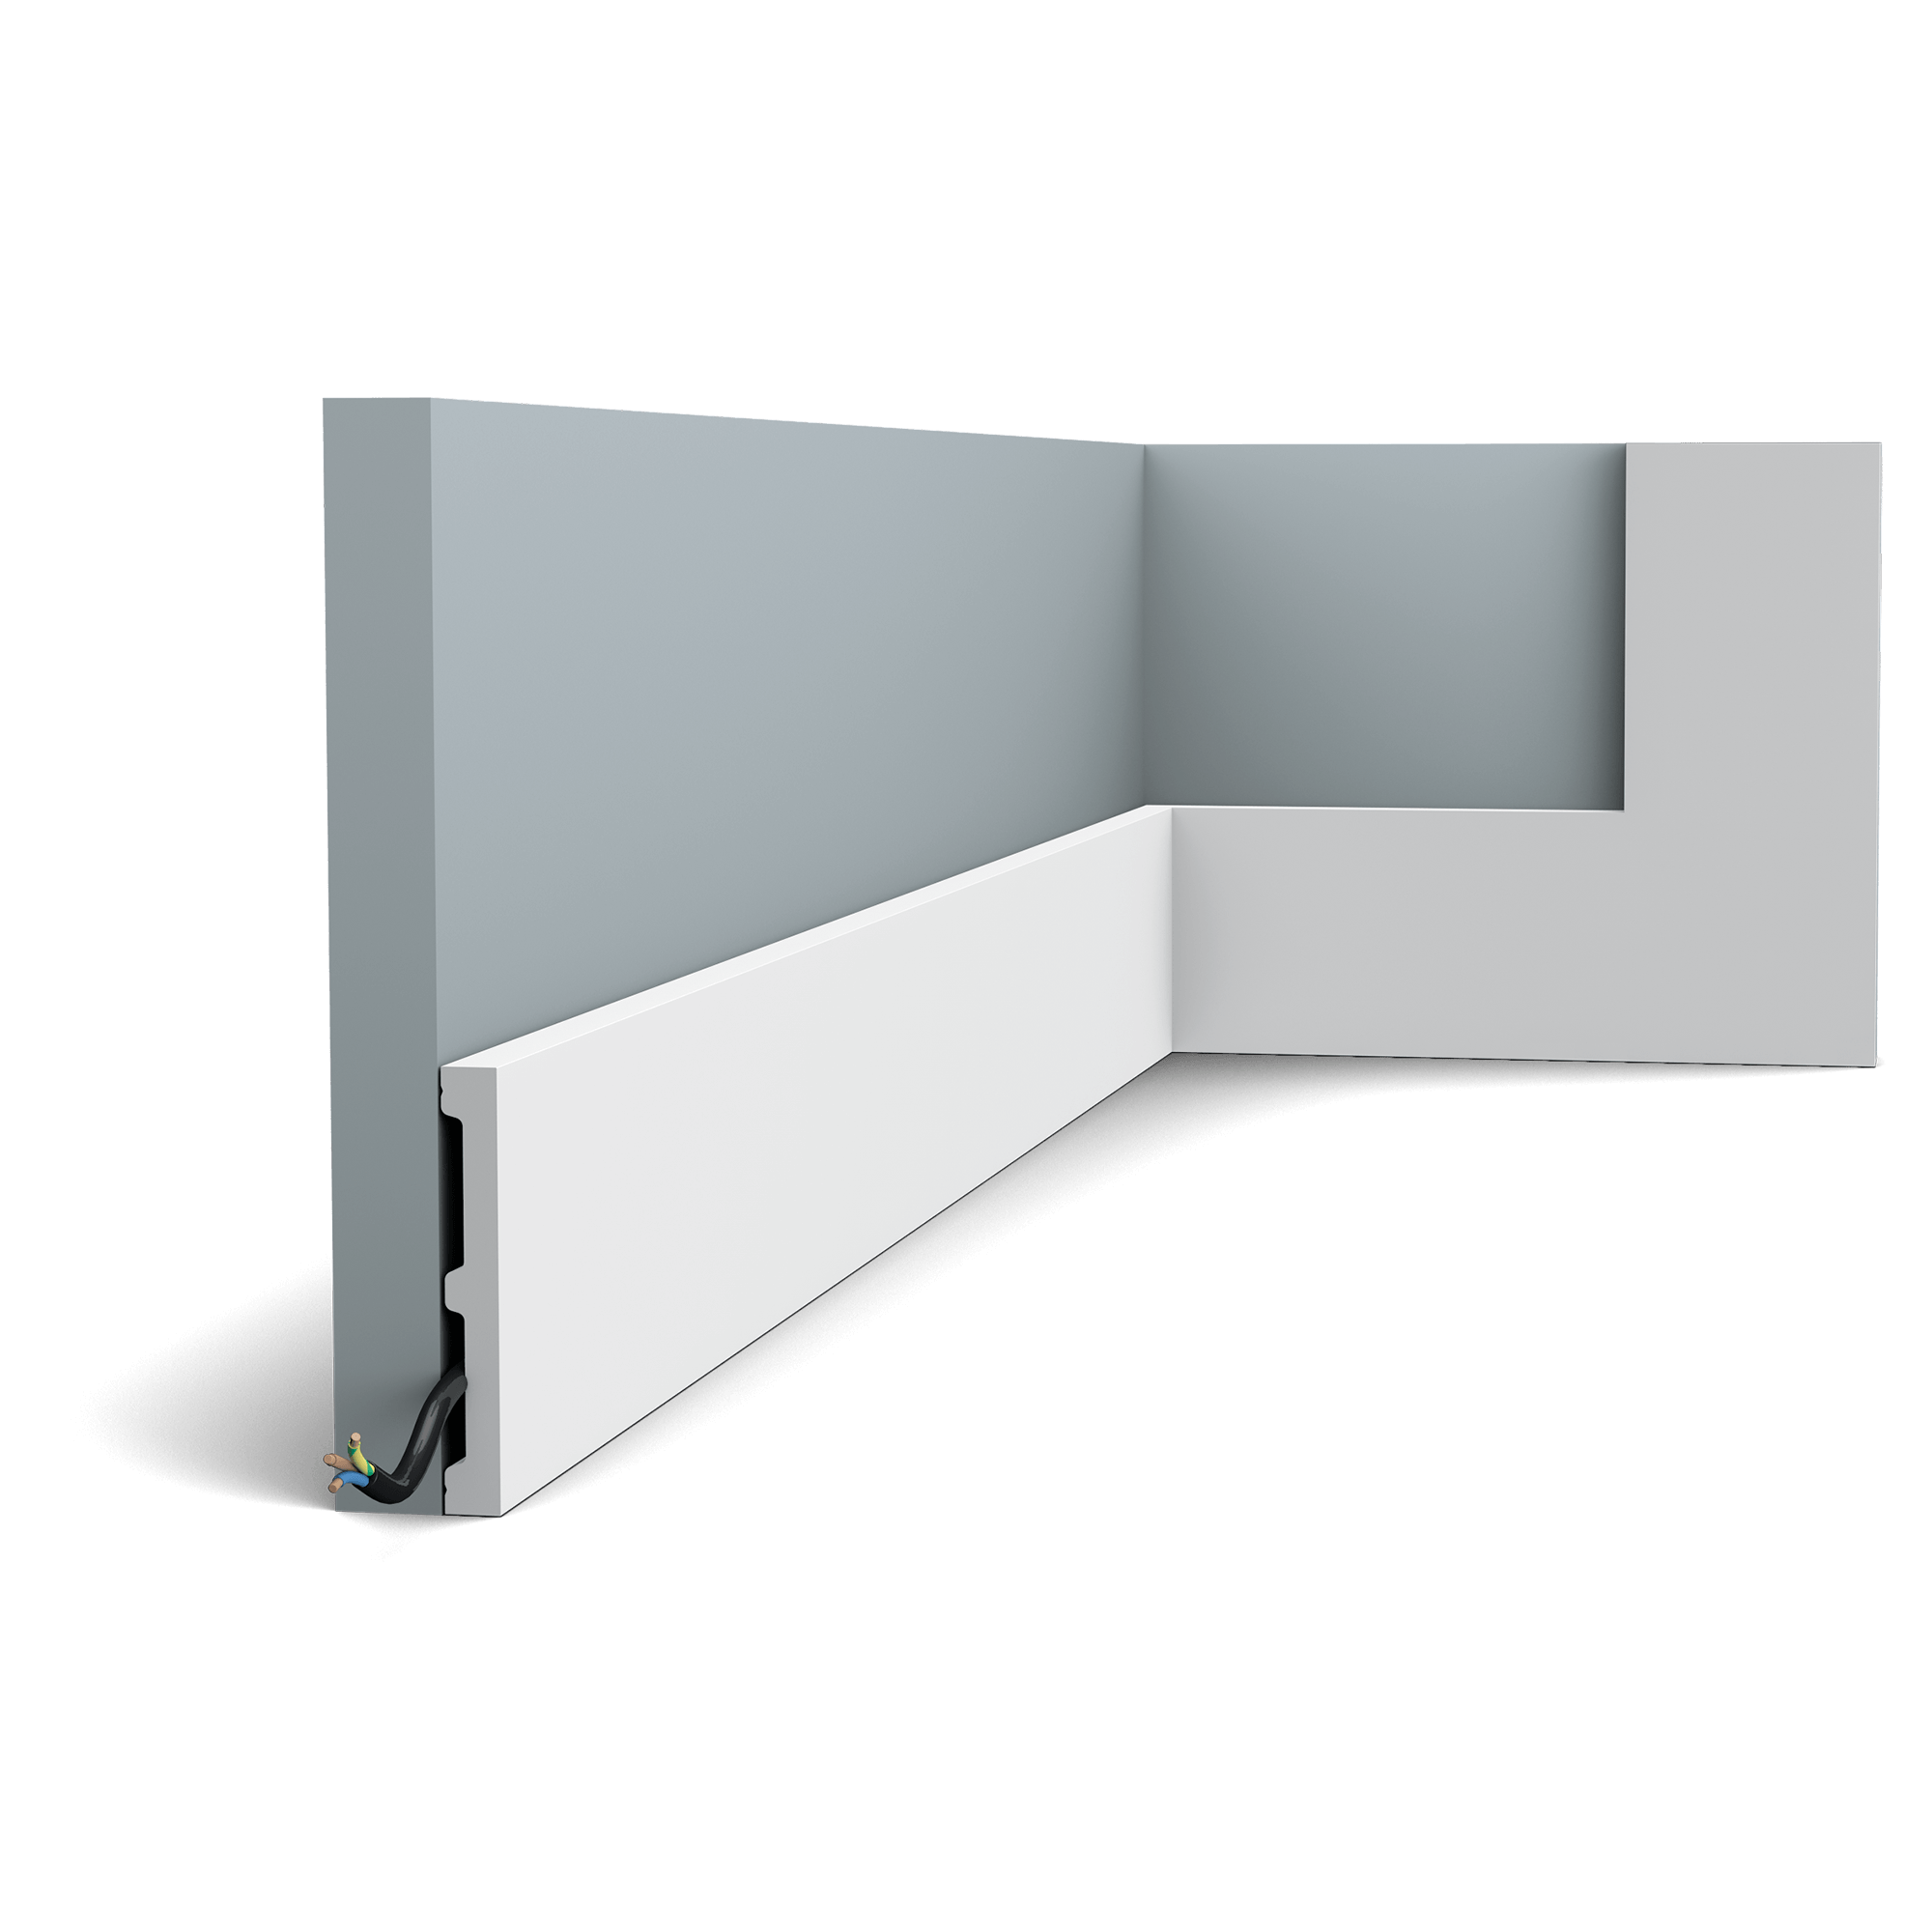 This large, simple skirting board is part of the SQUARE family. Use this multifunctional profile to fit your entire home with the same skirting board. All you need to do is select the correct size to fit your space.